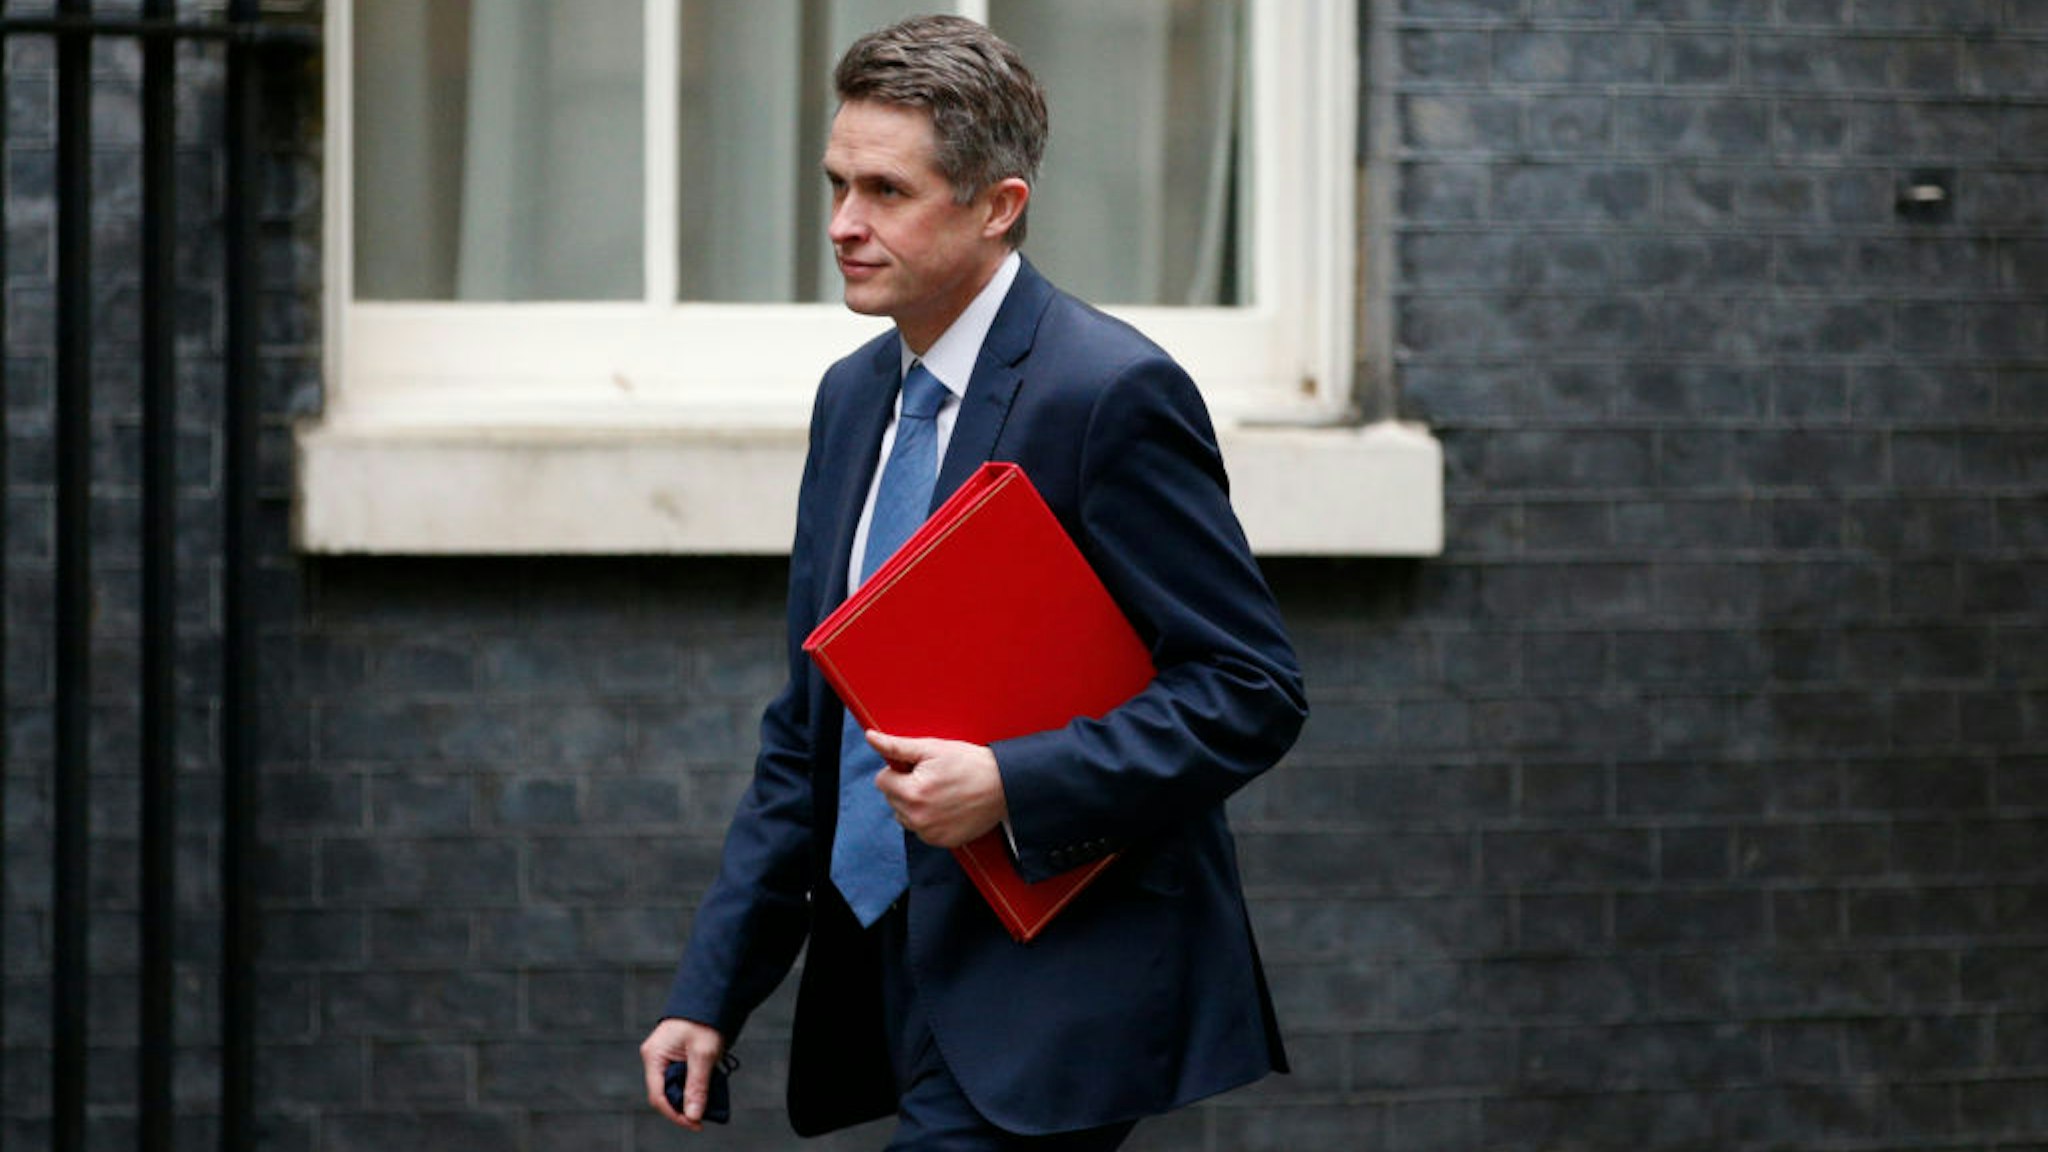 Secretary of State for Education Gavin Williamson, Conservative Party MP for South Staffordshire, walks along Downing Street in London, England, on January 27, 2021.